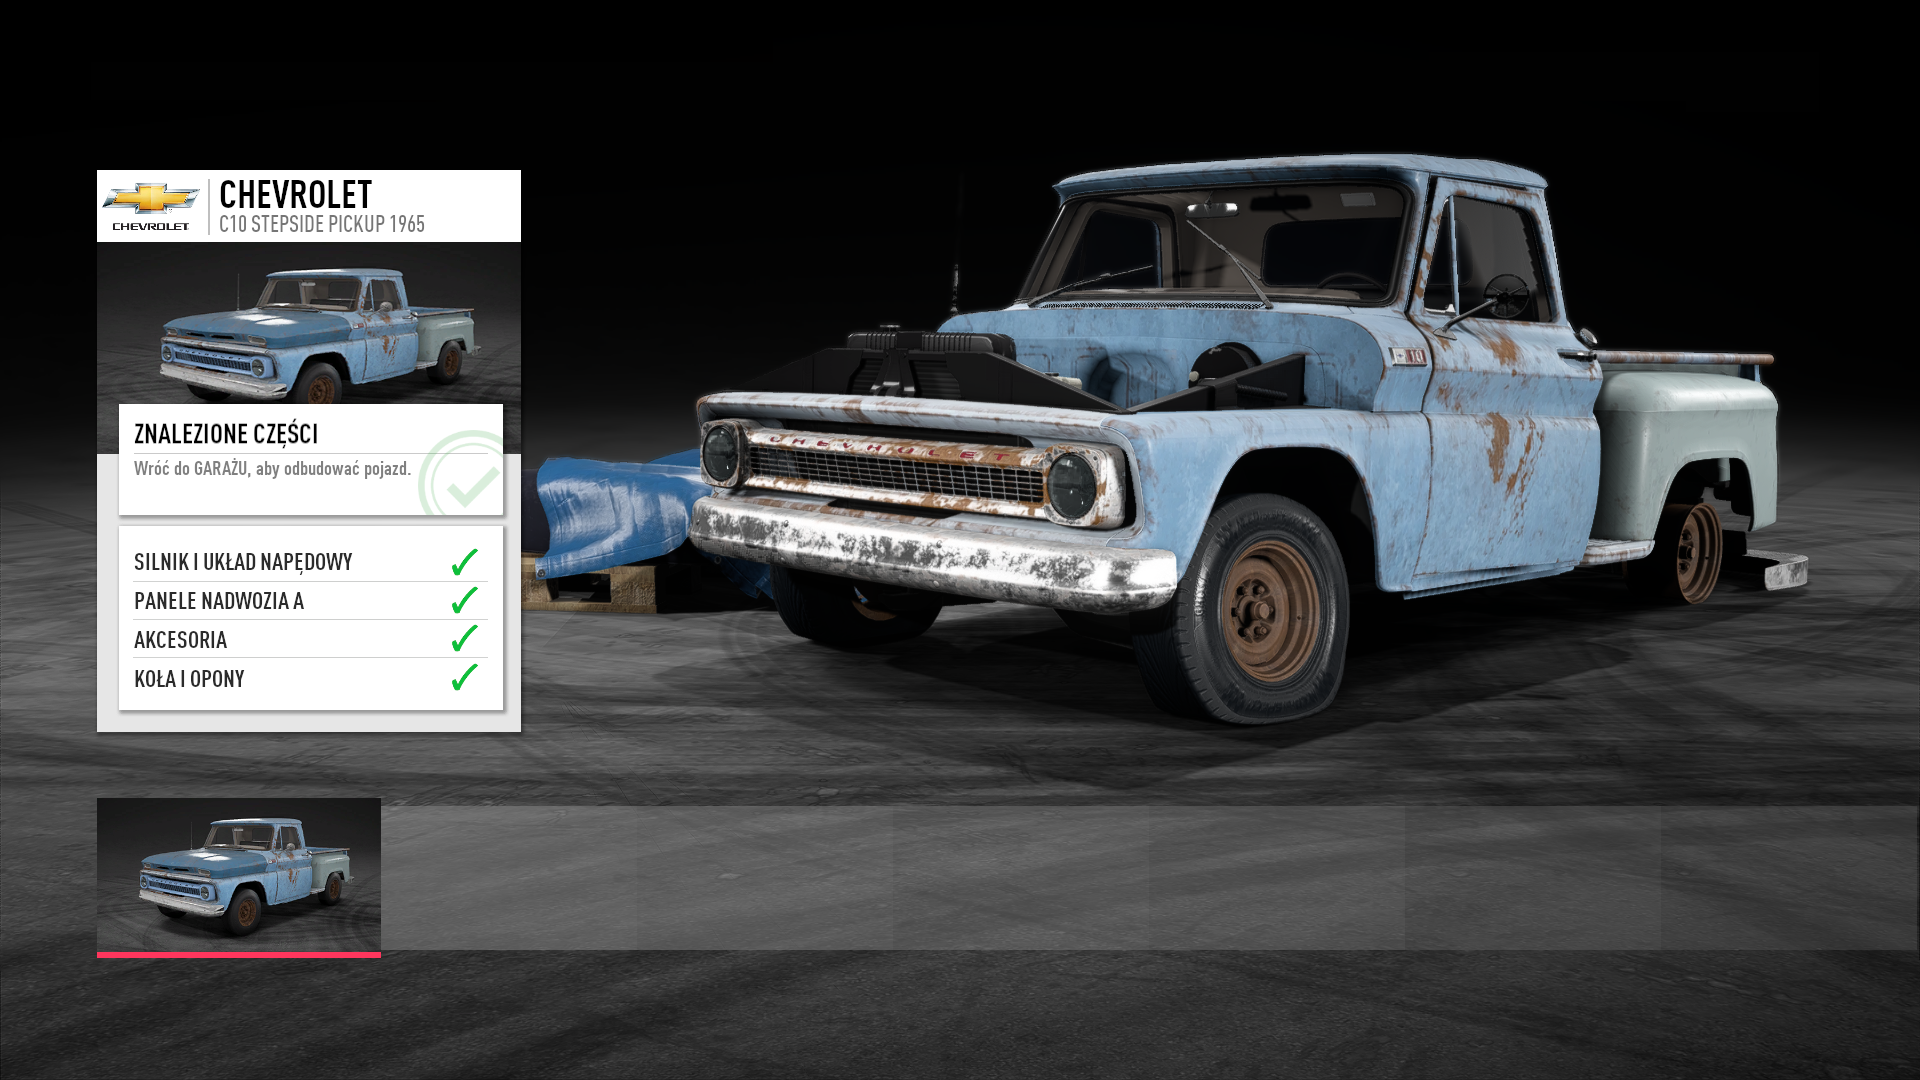 C 10 com. Chevrolet c10 NFS Payback. Chevrolet c10 Stepside Pickup в need for Speed Payback. Реликвии пейбек Chevrolet c10 Stepside Pickup 1965. Chevrolet c10 Payback.